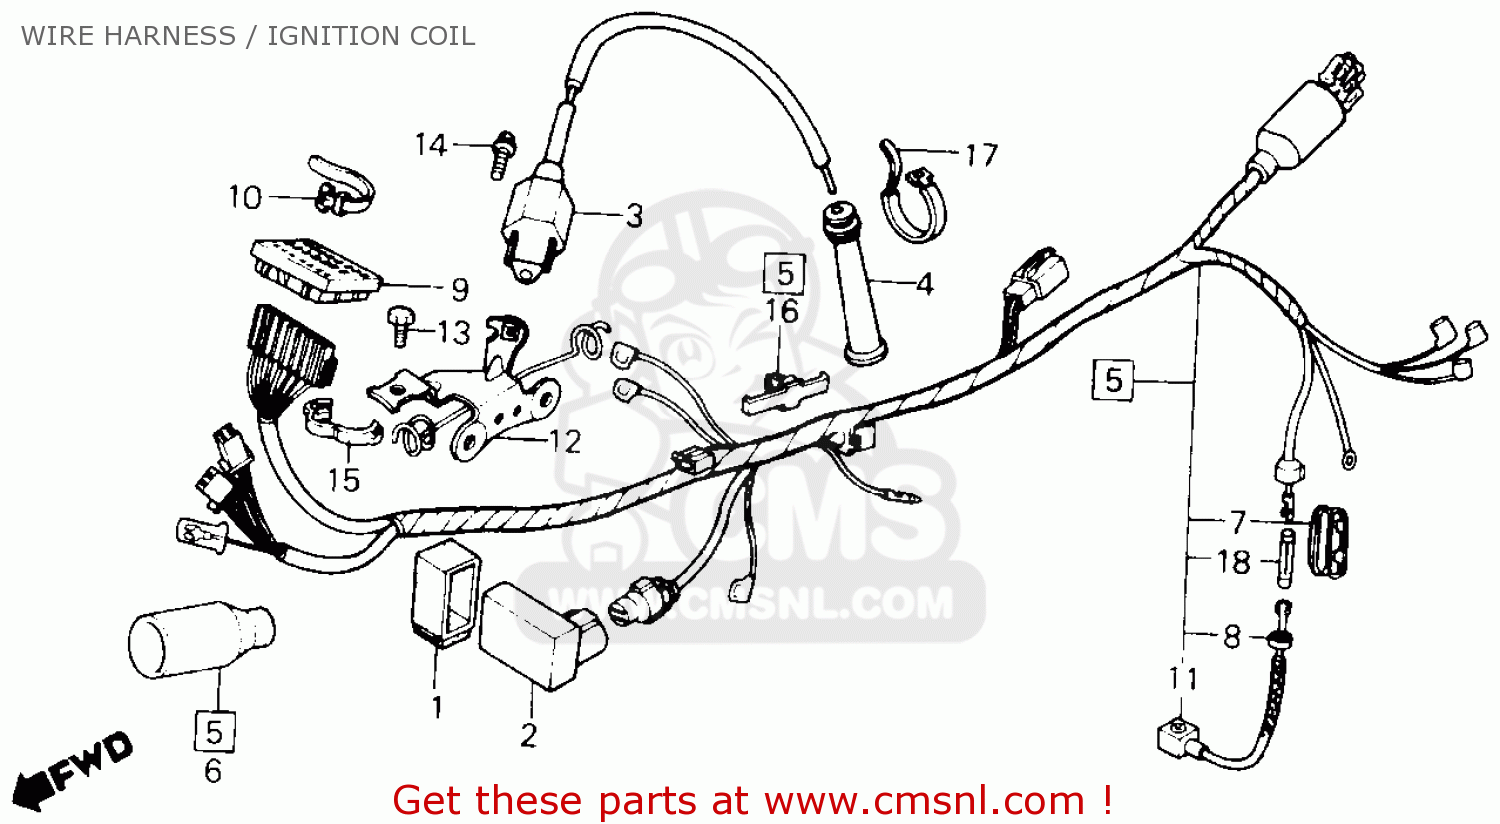 Honda Xl600r 1983 (d) Usa Wire Harness / Ignition Coil - schematic